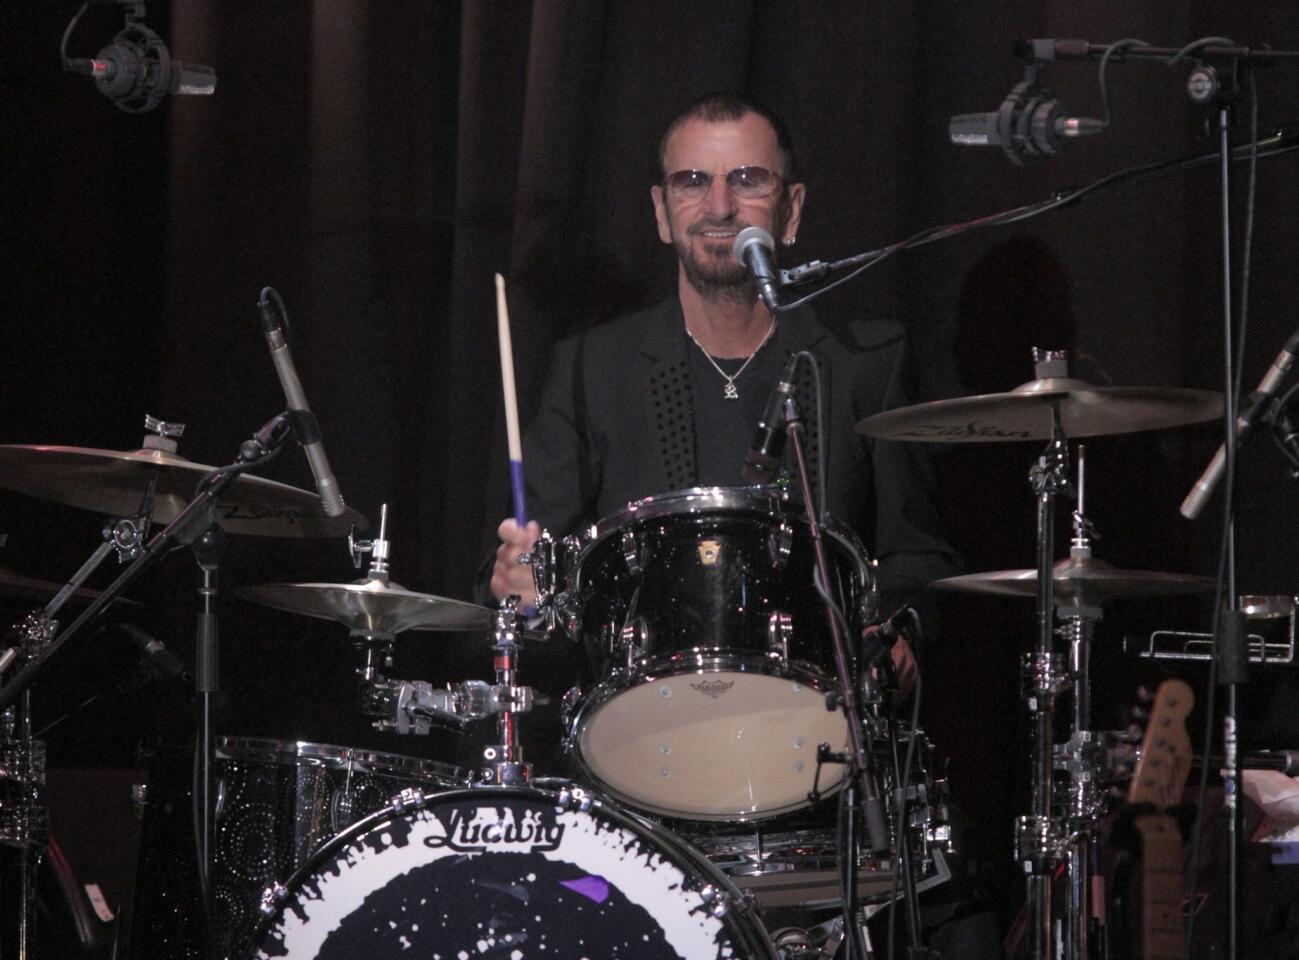 All-star tribute to Ringo Starr